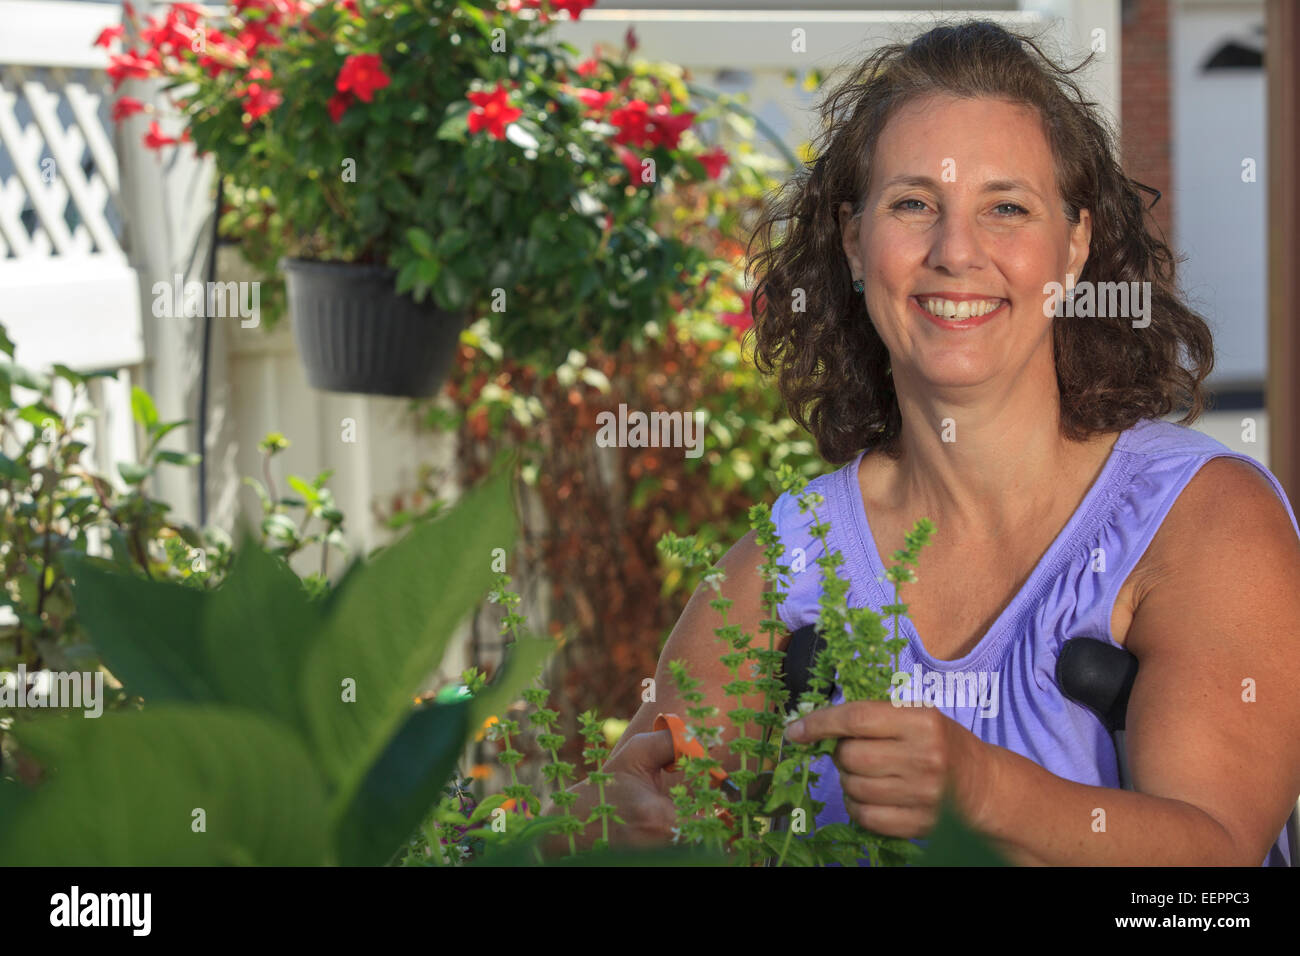 Woman with Spina Bifida using crutches and cutting garden flowers Stock Photo